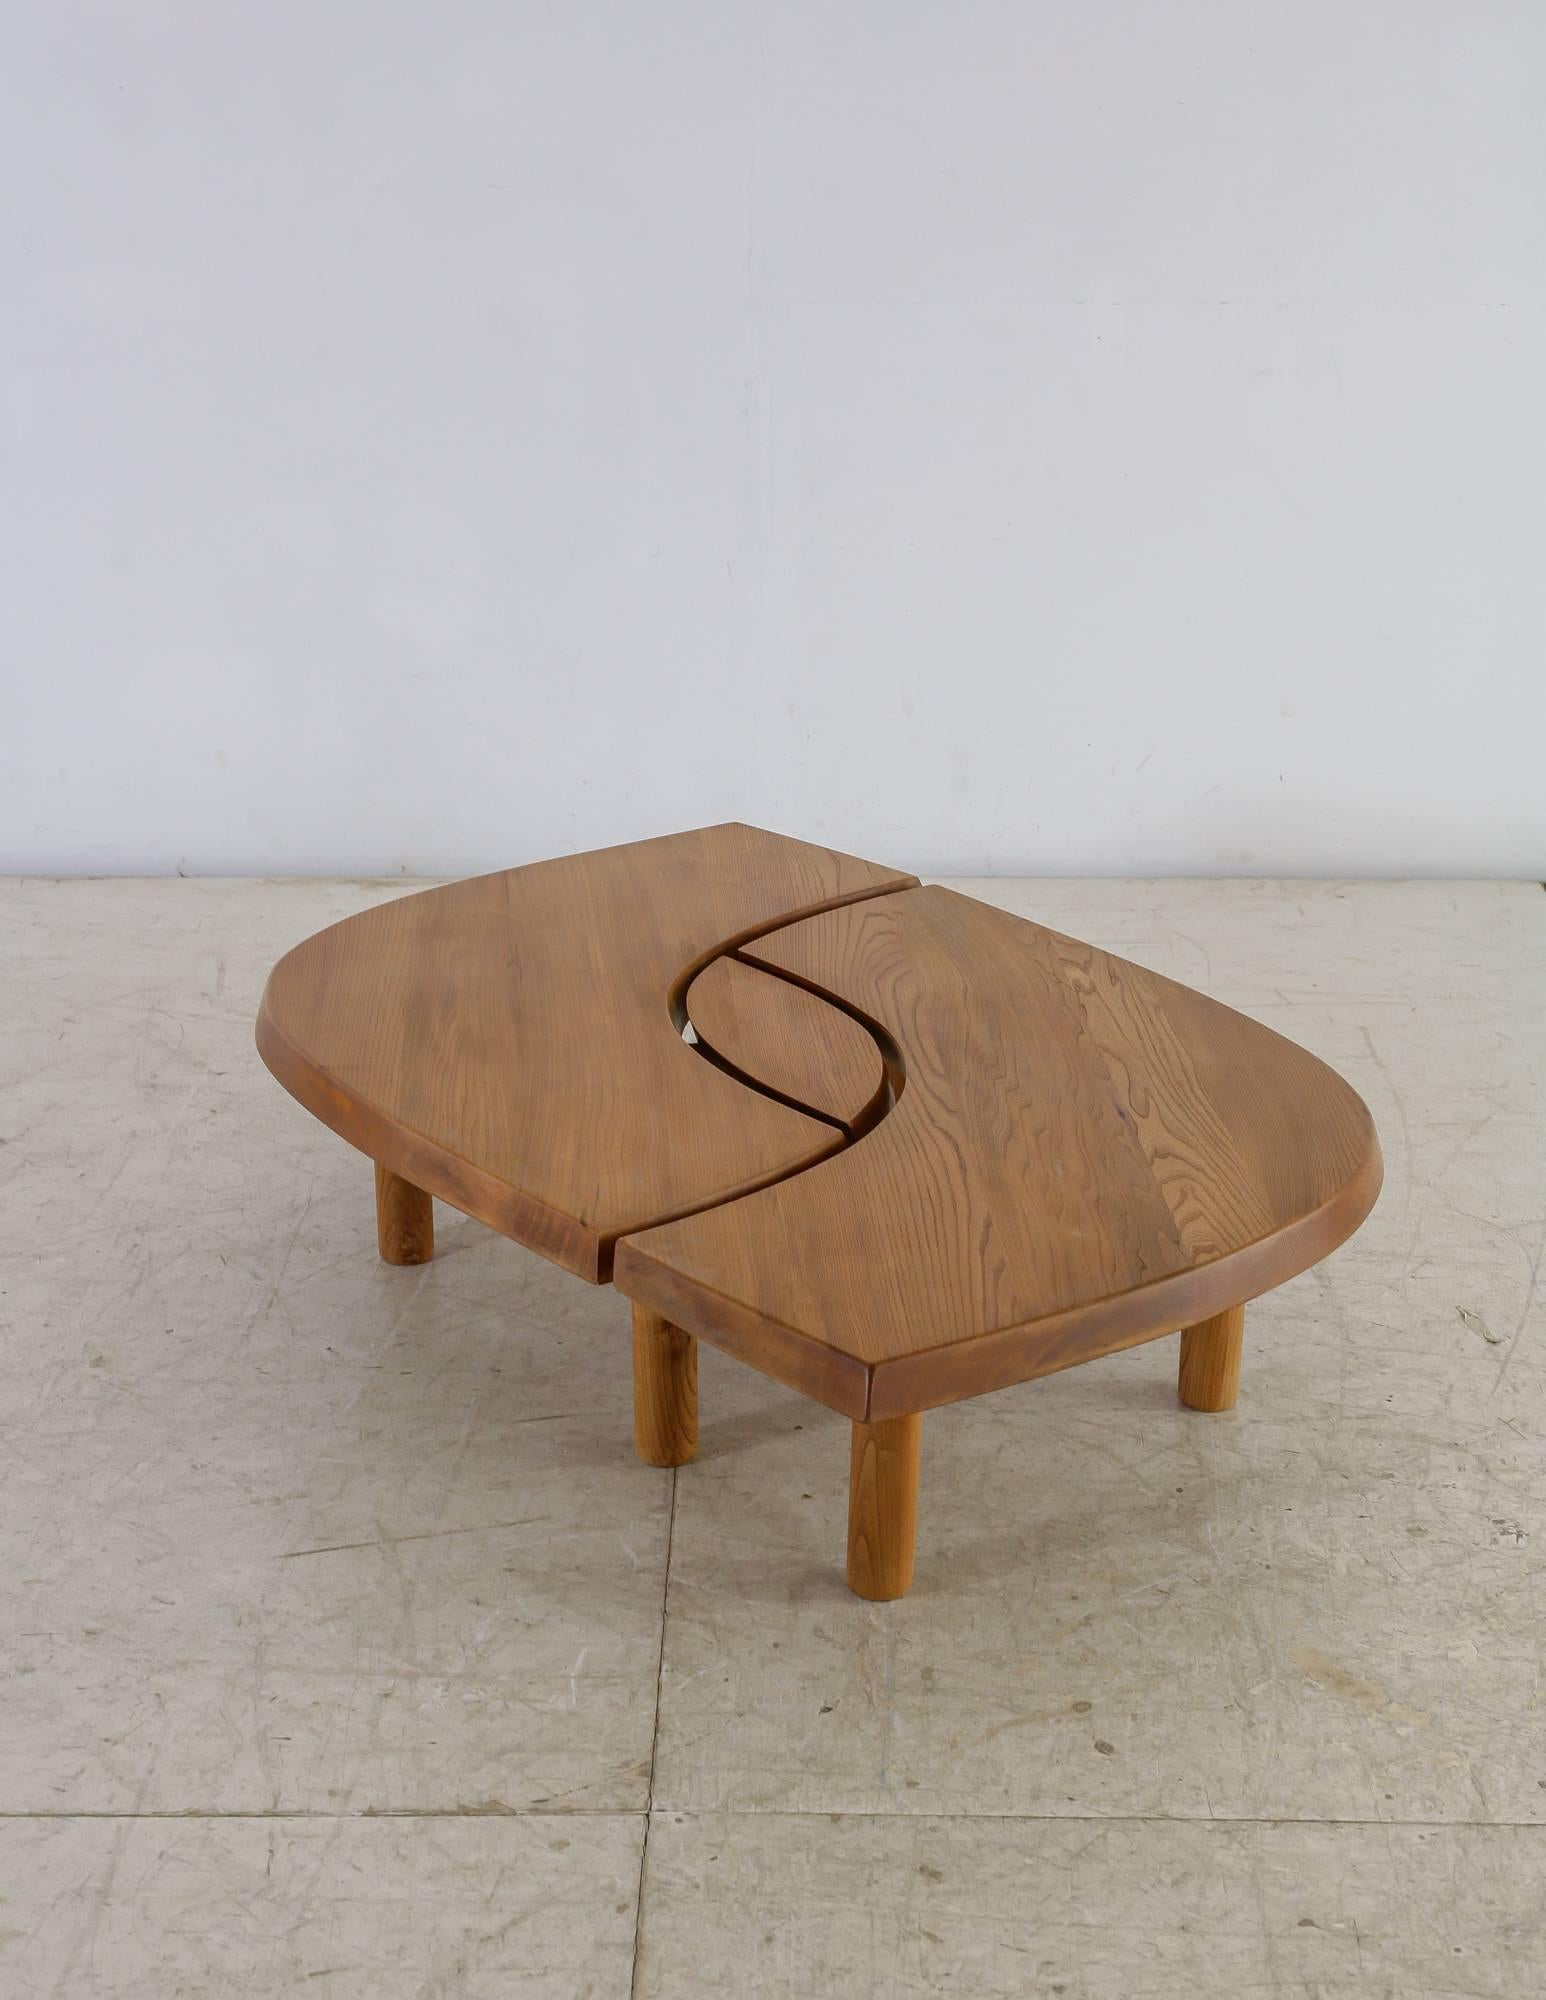 A model T22, or L'Oeuil ('eye'), coffee table in Elm by Pierre Chapo. This piece can be used as either one large table, or as two boomerang shaped tables and one small almond shaped table.
The table is beautifully darkened from age.